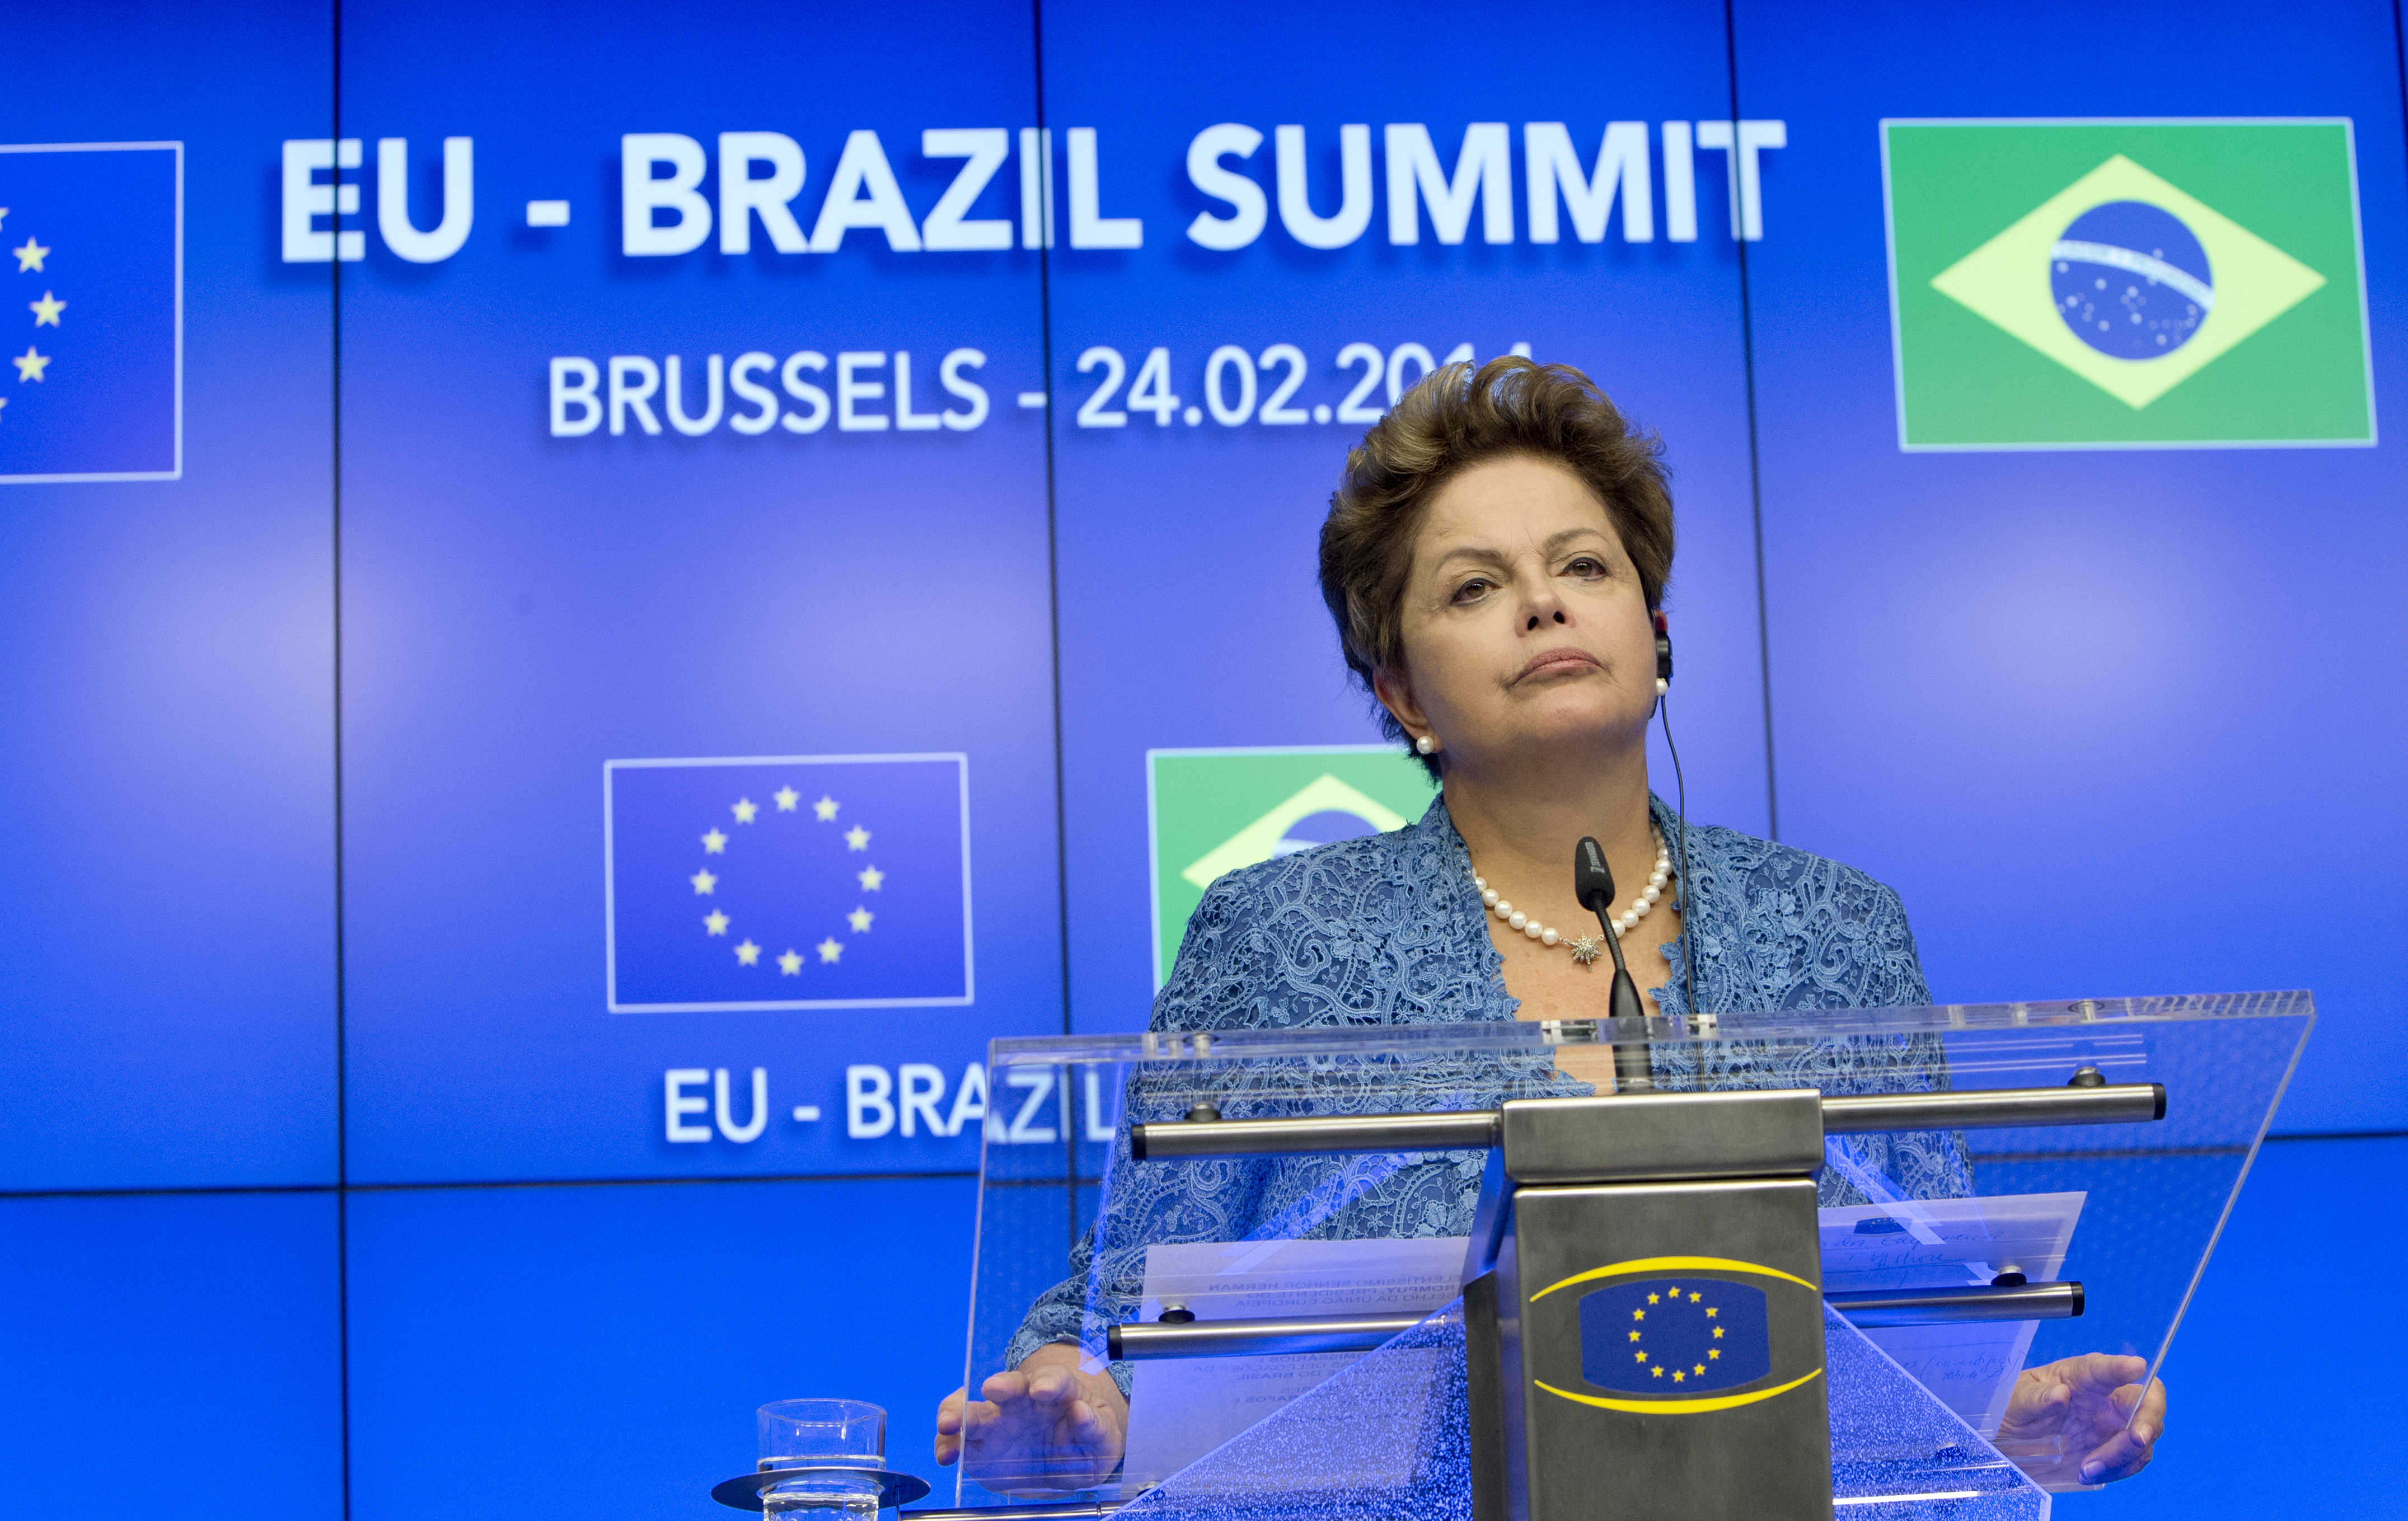 Former president of Brazil Dilma Rousseff speaking in Brussels (by the European Council)